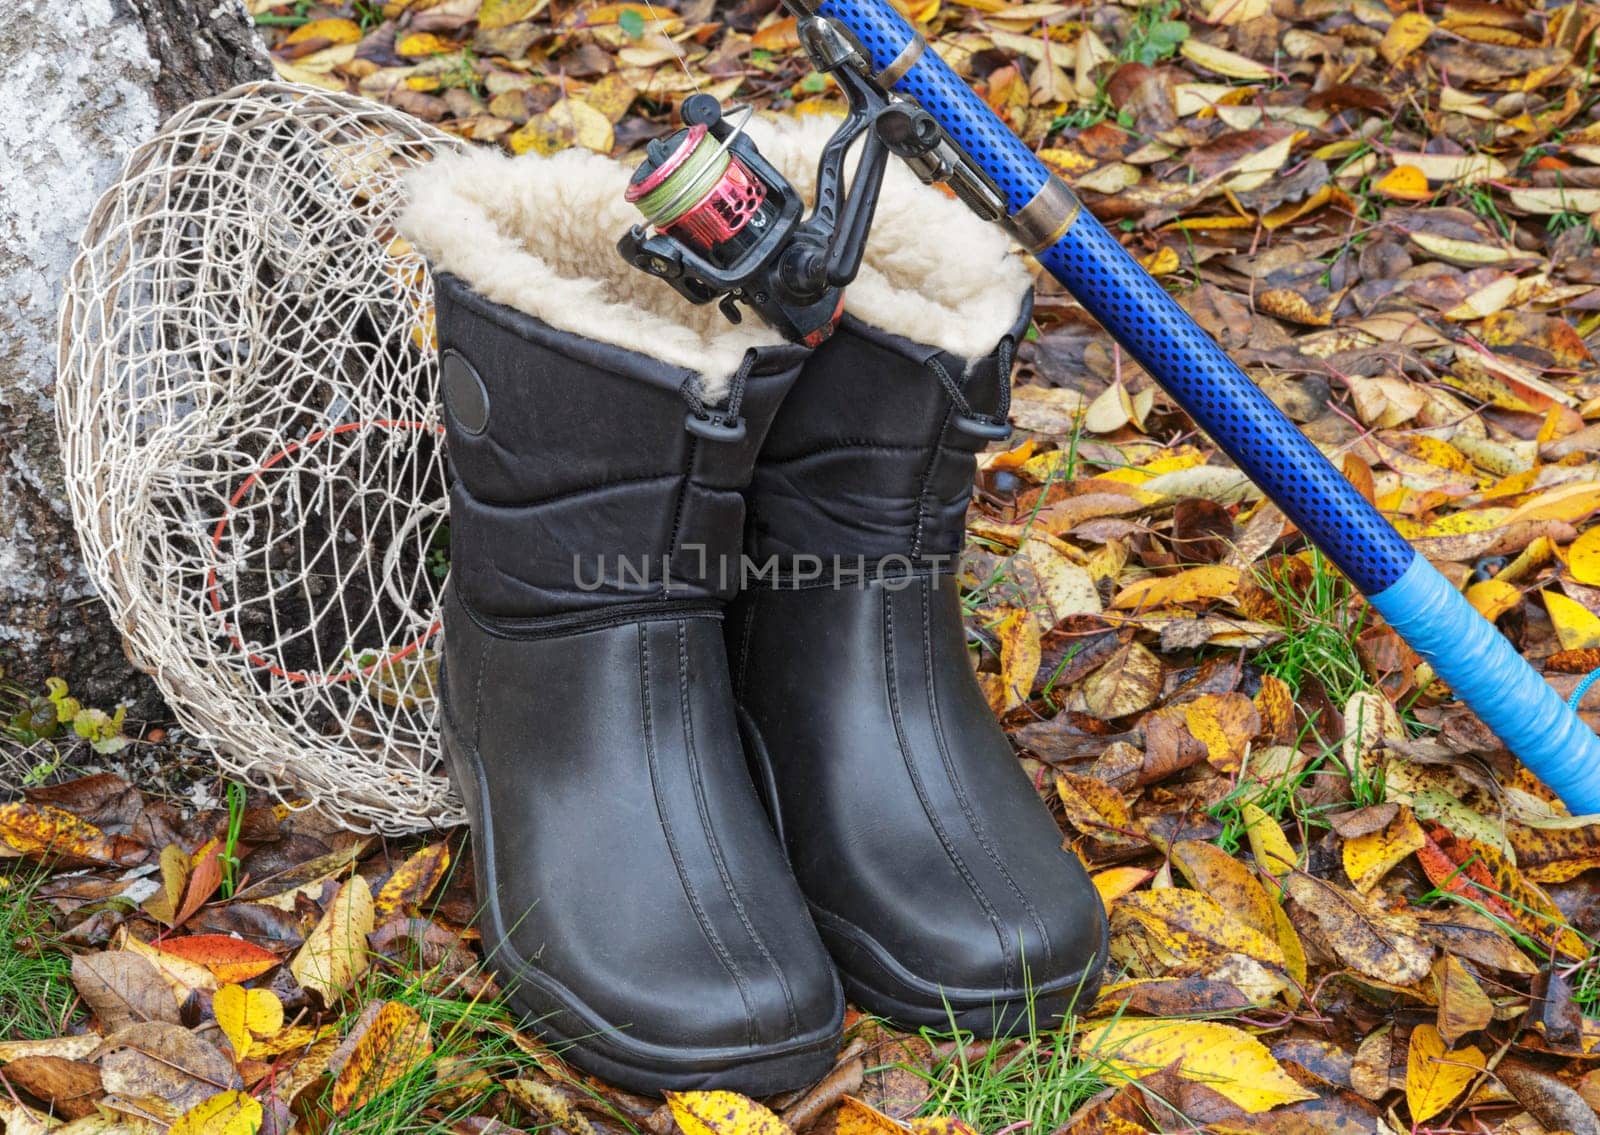 Shoes and items for fishing. by georgina198